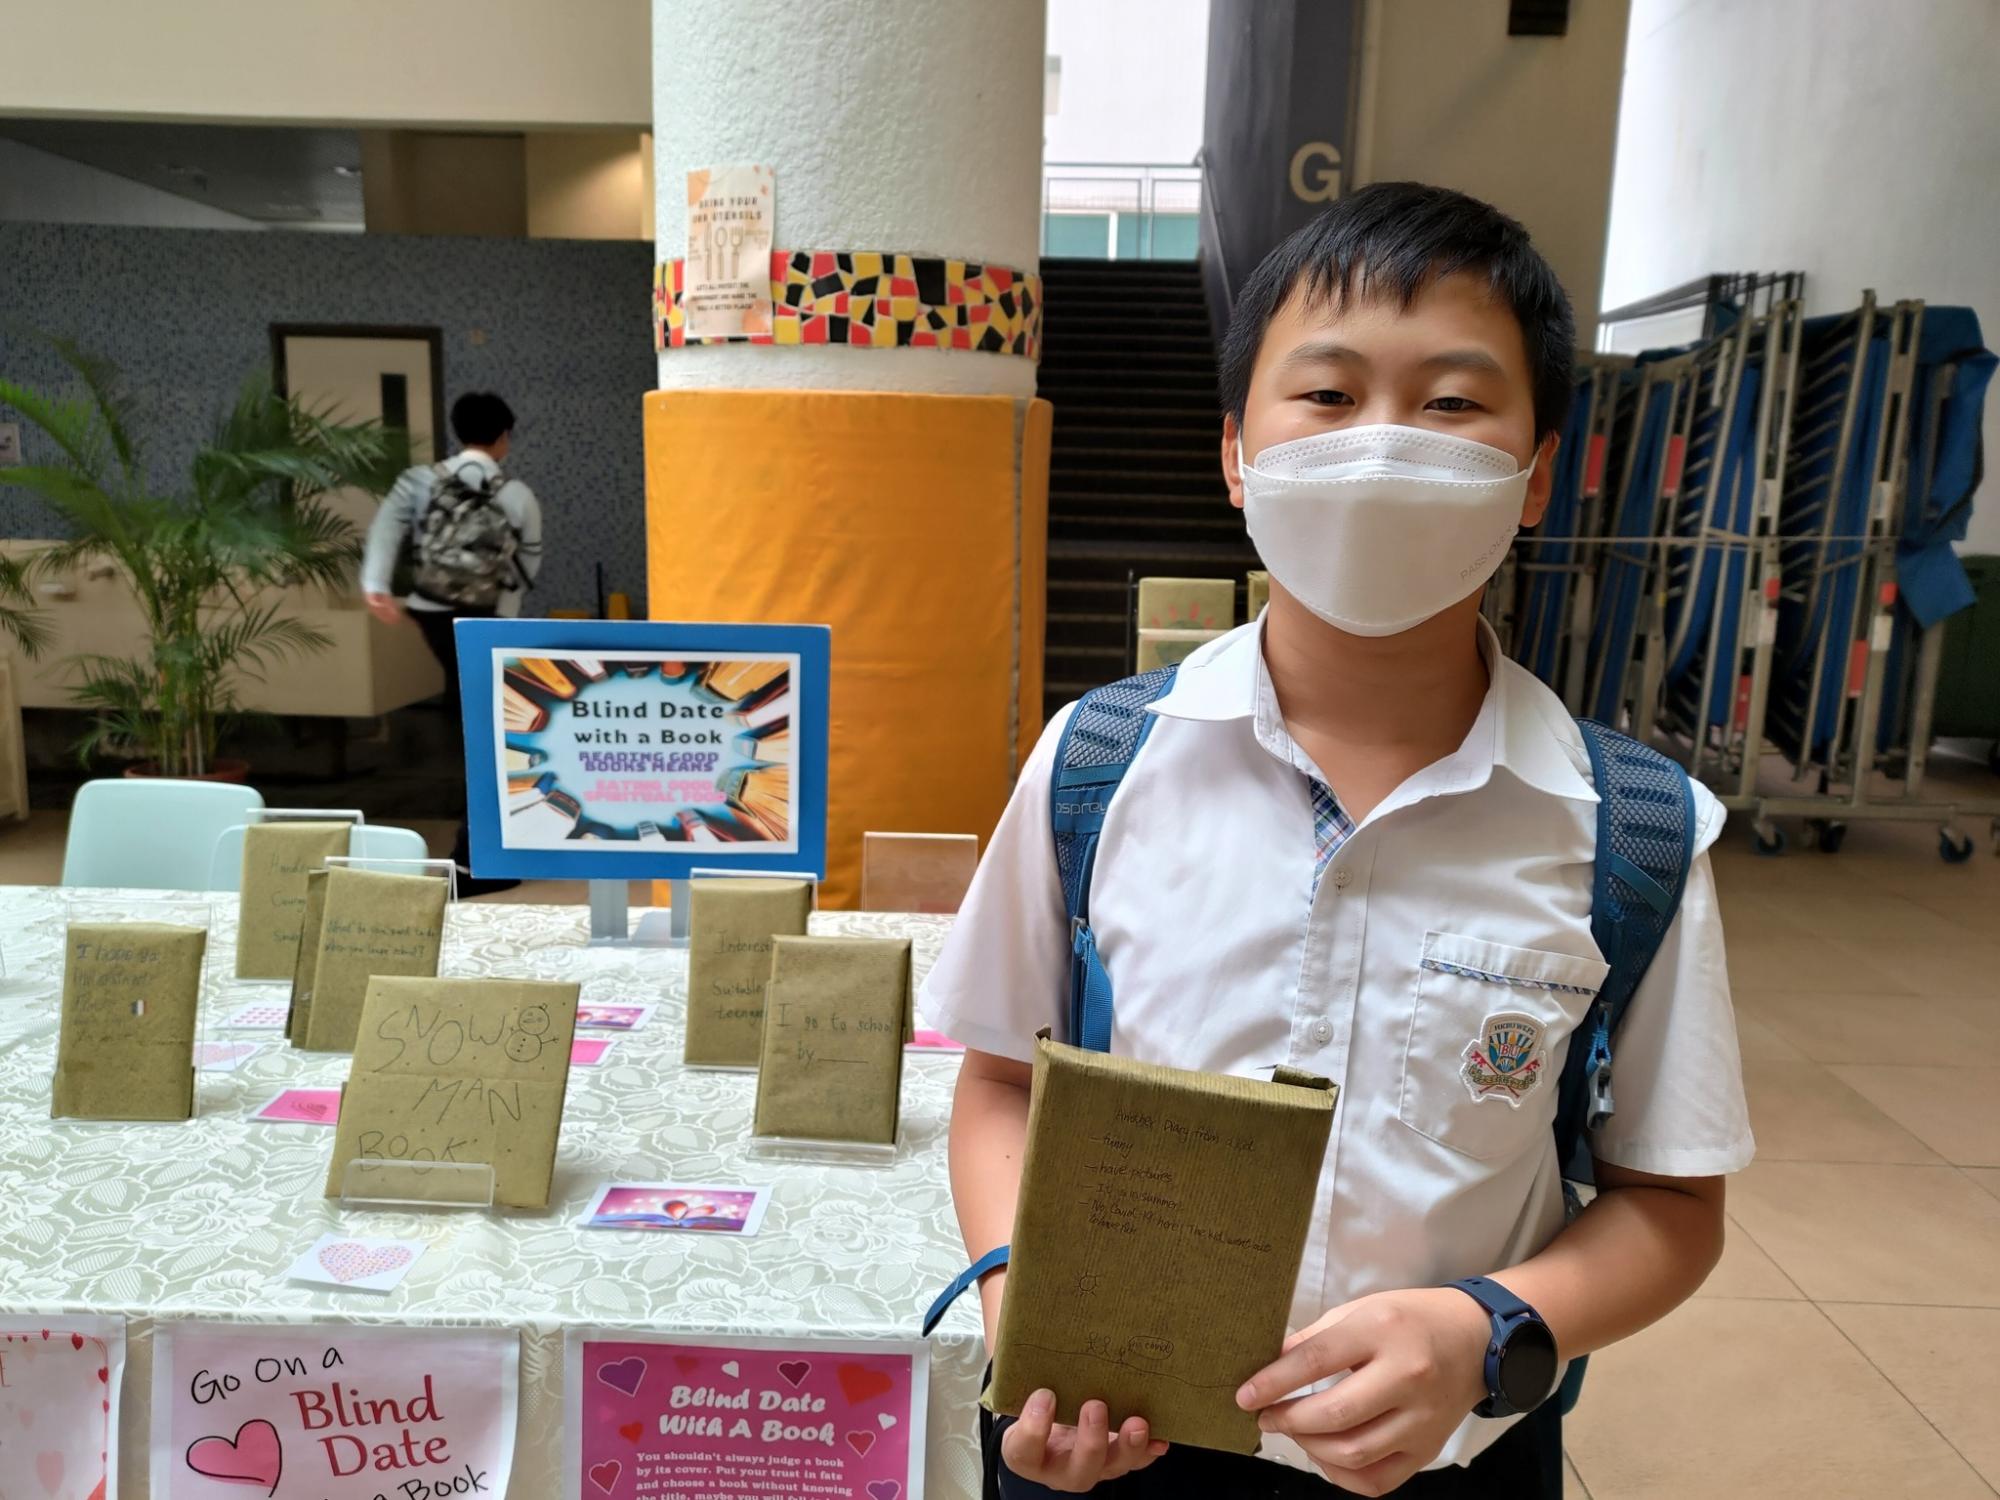 Students participating in an English activity called Blind Date with a Book to celebrate the Thanksgiving Day